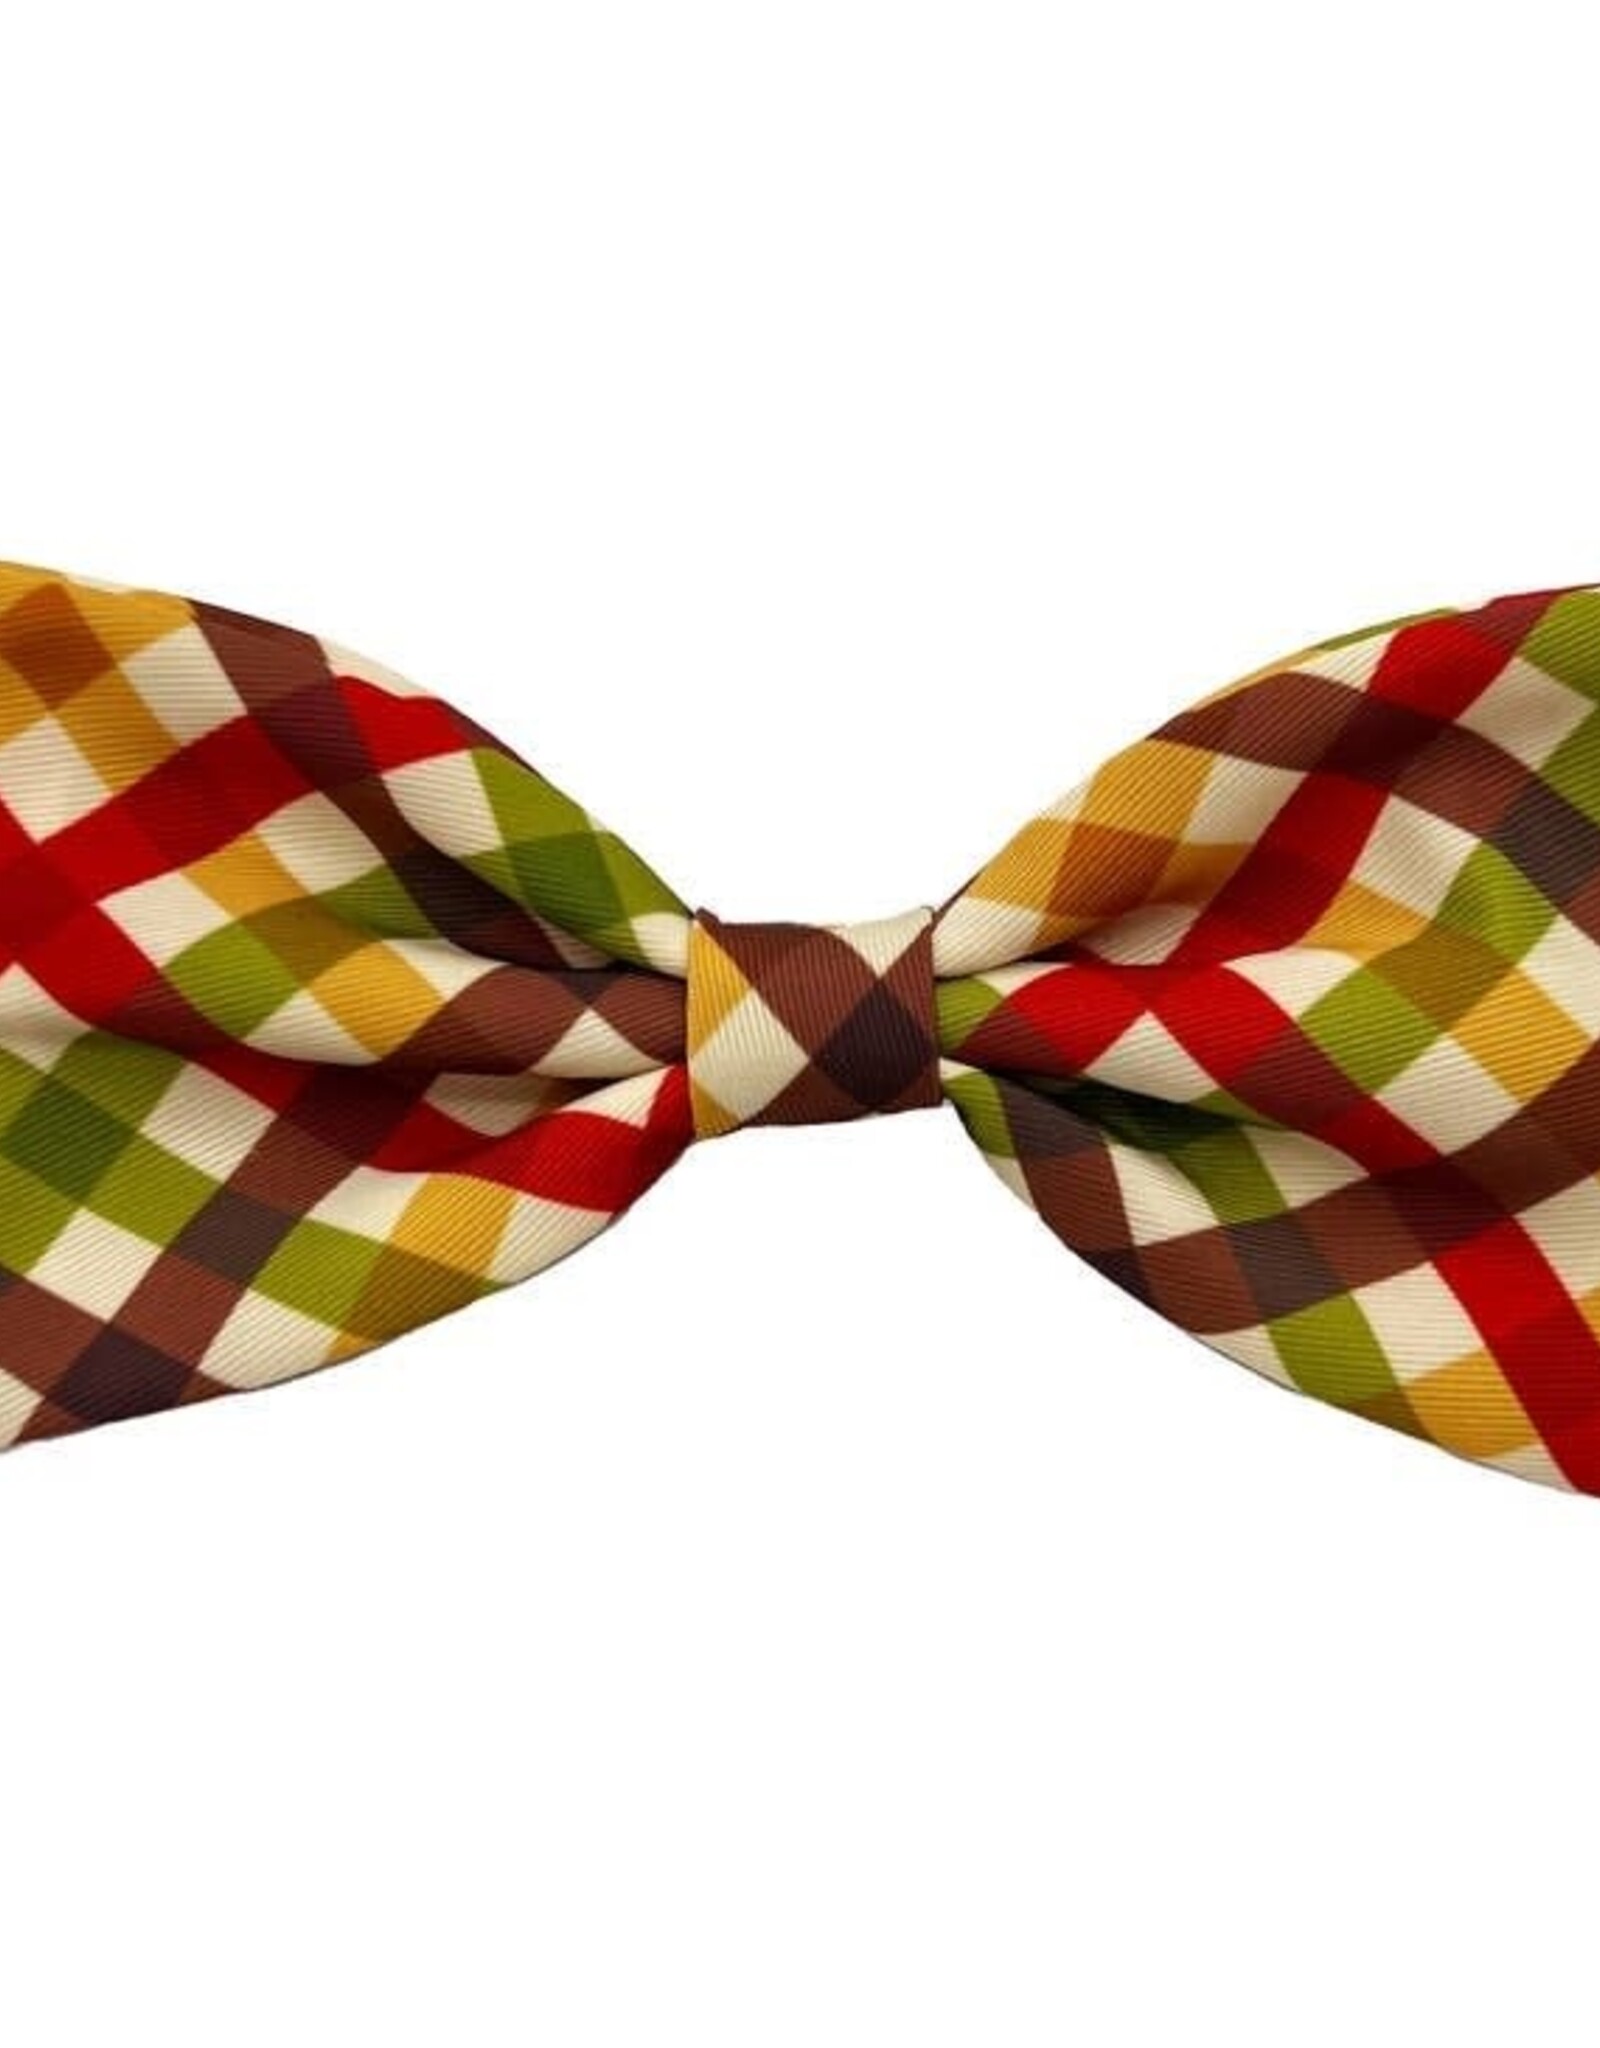 Huxley & Kent Fall Bow Tie - Harvest Check